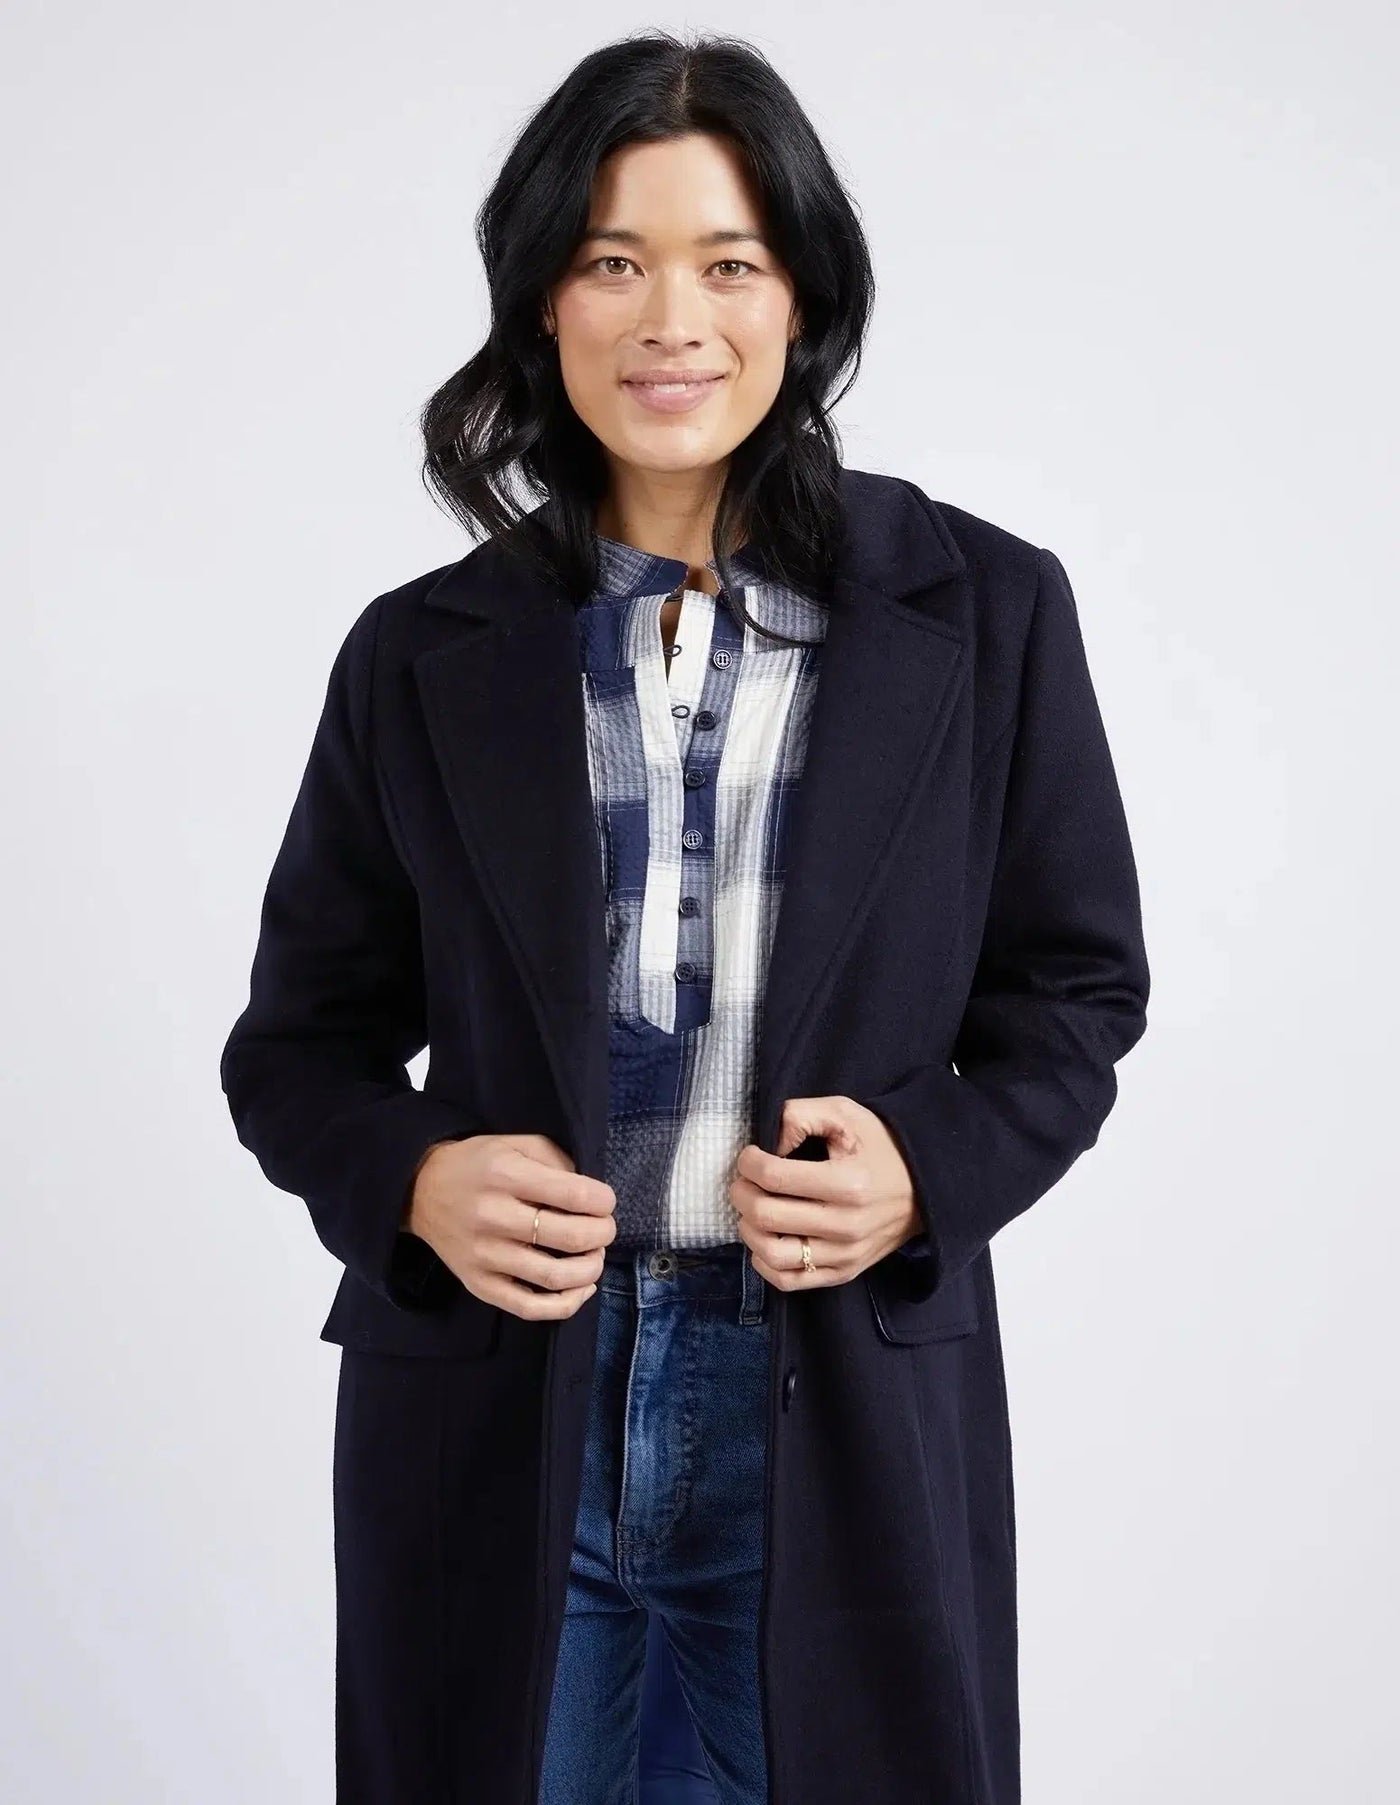 Tamsin Coat - Navy-Elm Lifestyle-Lima & Co